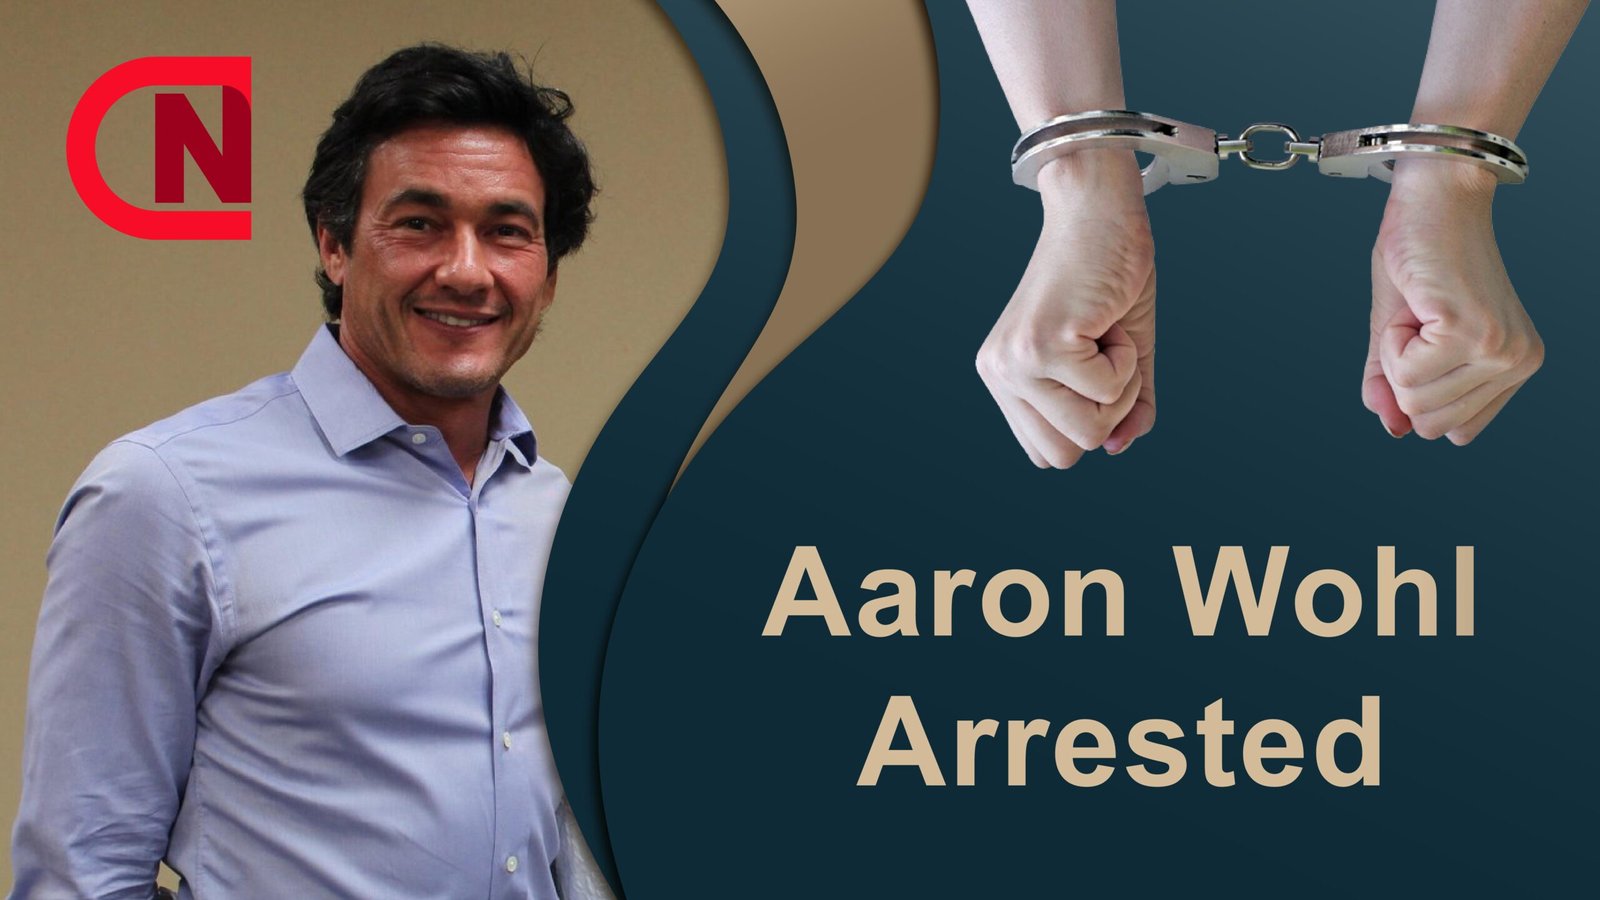 Aaron Wohl Arrested-Revealing The Truth Behind His Arrest